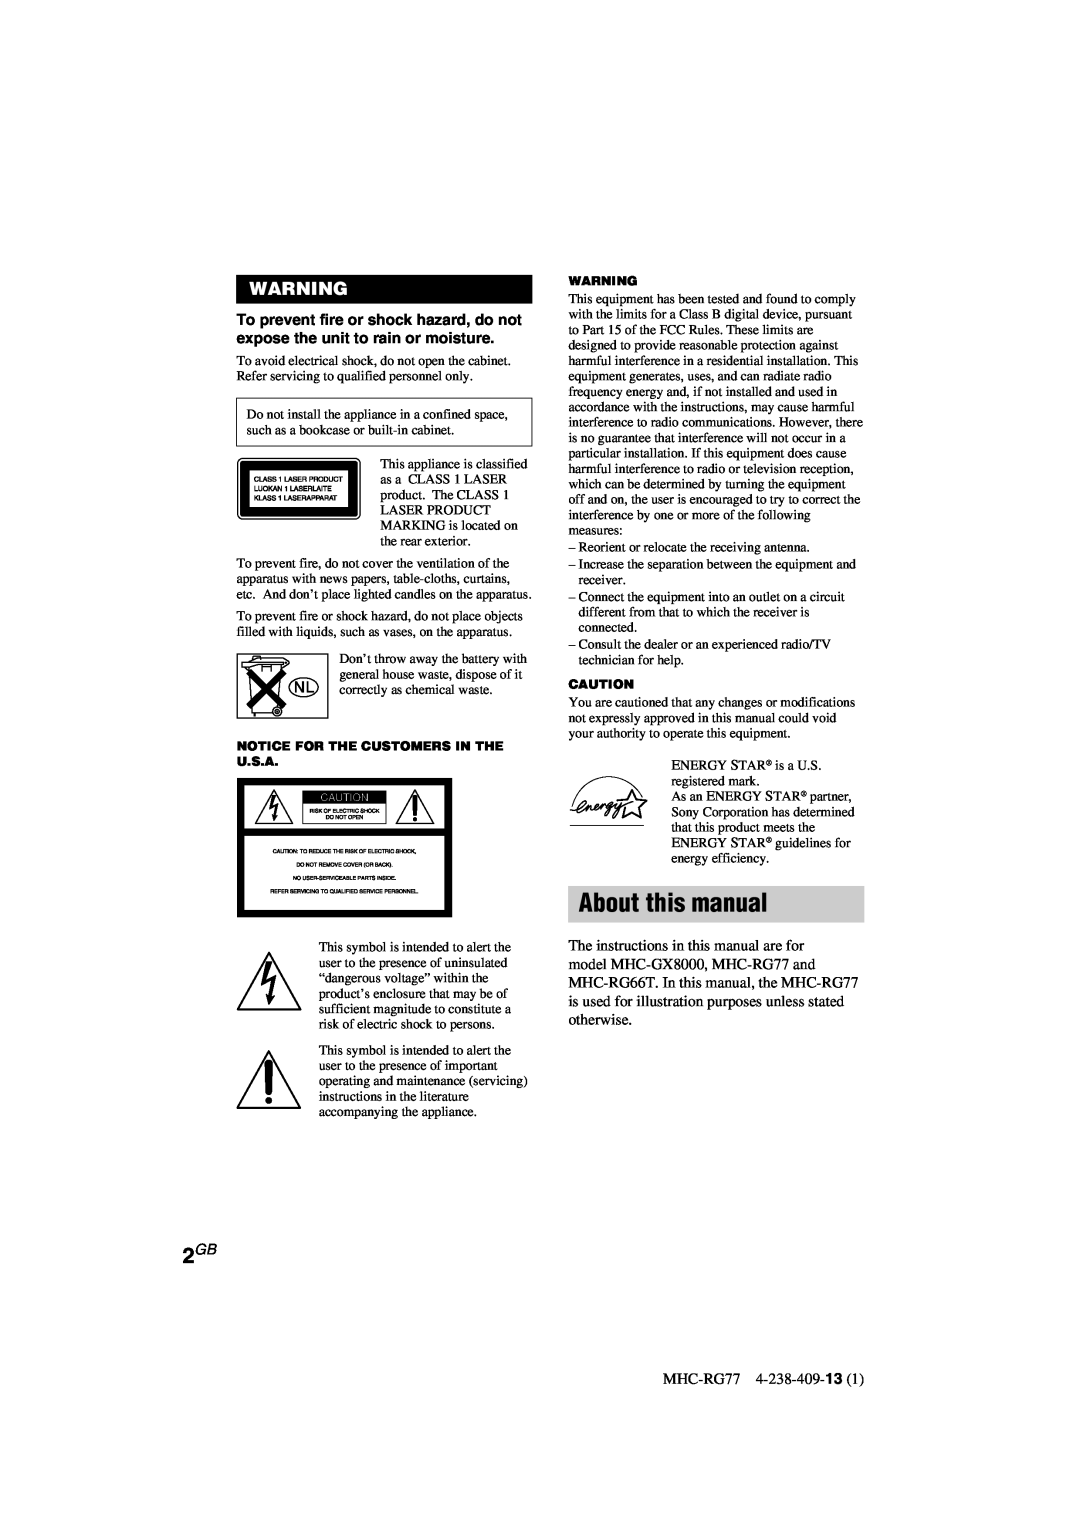 Sony MHC-GX8000/RG77 operating instructions About this manual, MHC-RG77 